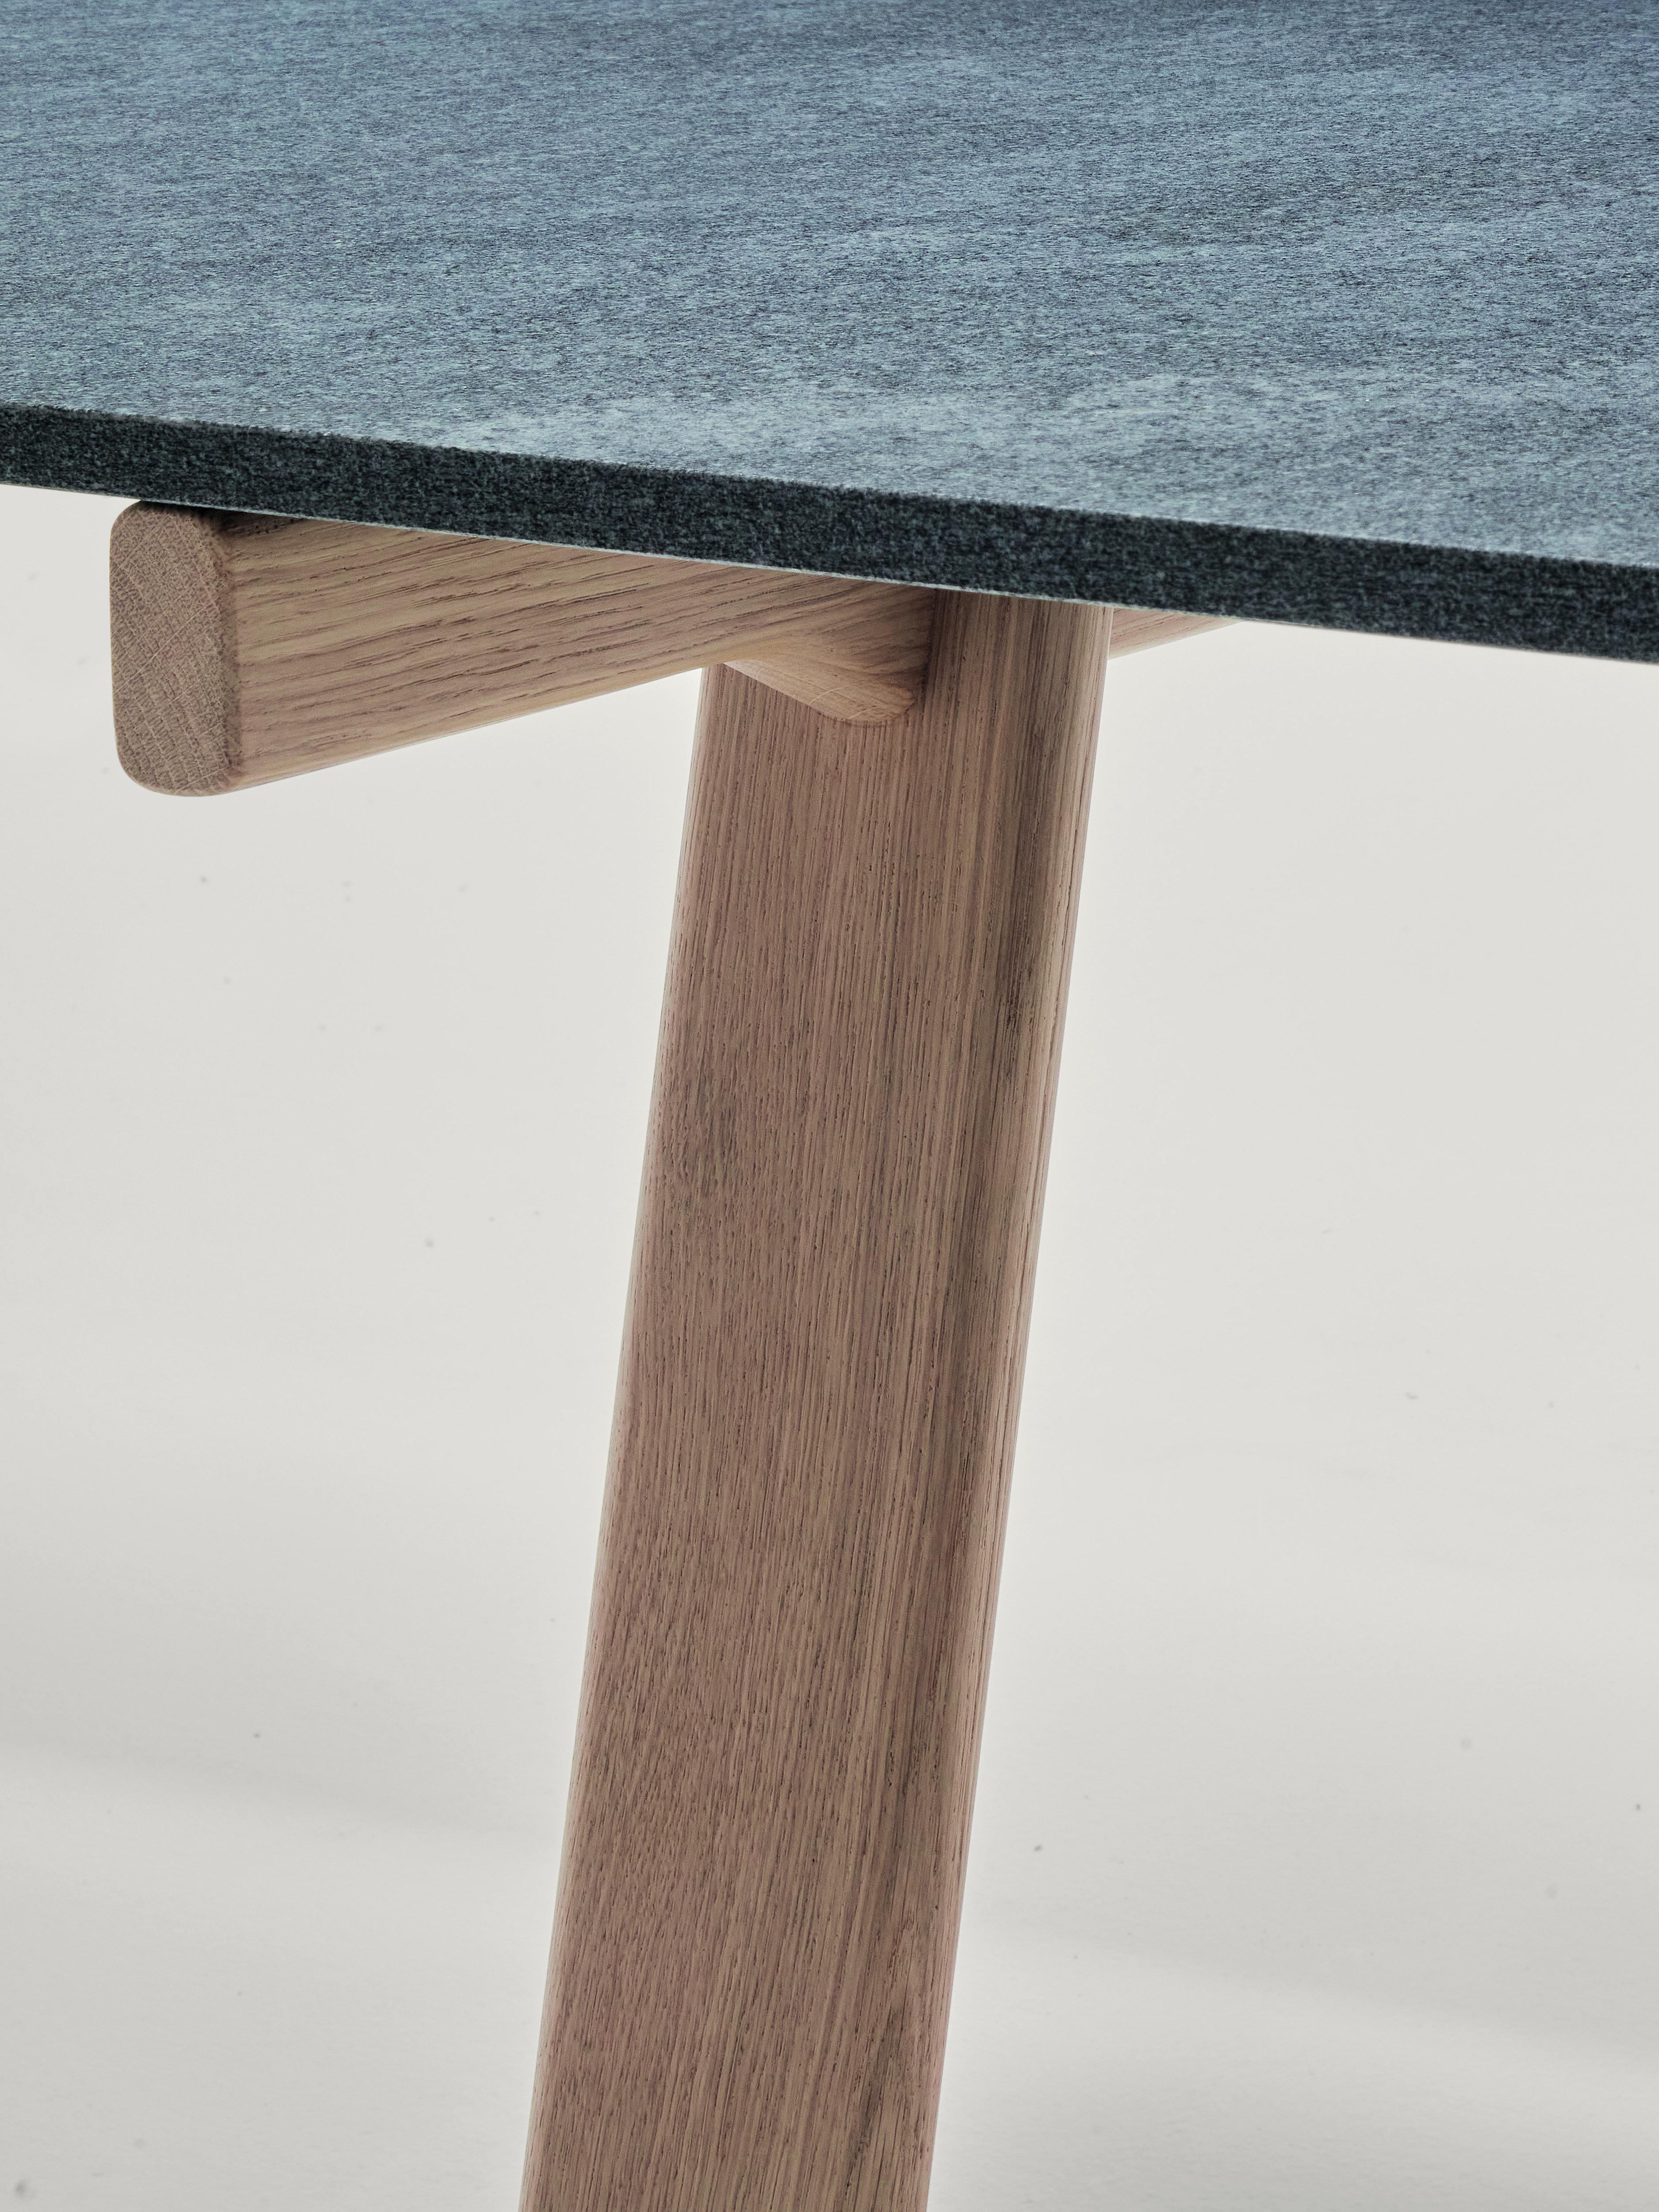 Zanotta Medium Ambrosiano Table in Onsernone Stone Top with Natural Oak Frame by Mist-o

Trestles in solid natural oak or painted black with open pore. Matt black painted stainless steel spars. Top available either in 1/2” thick smoky grey tempered